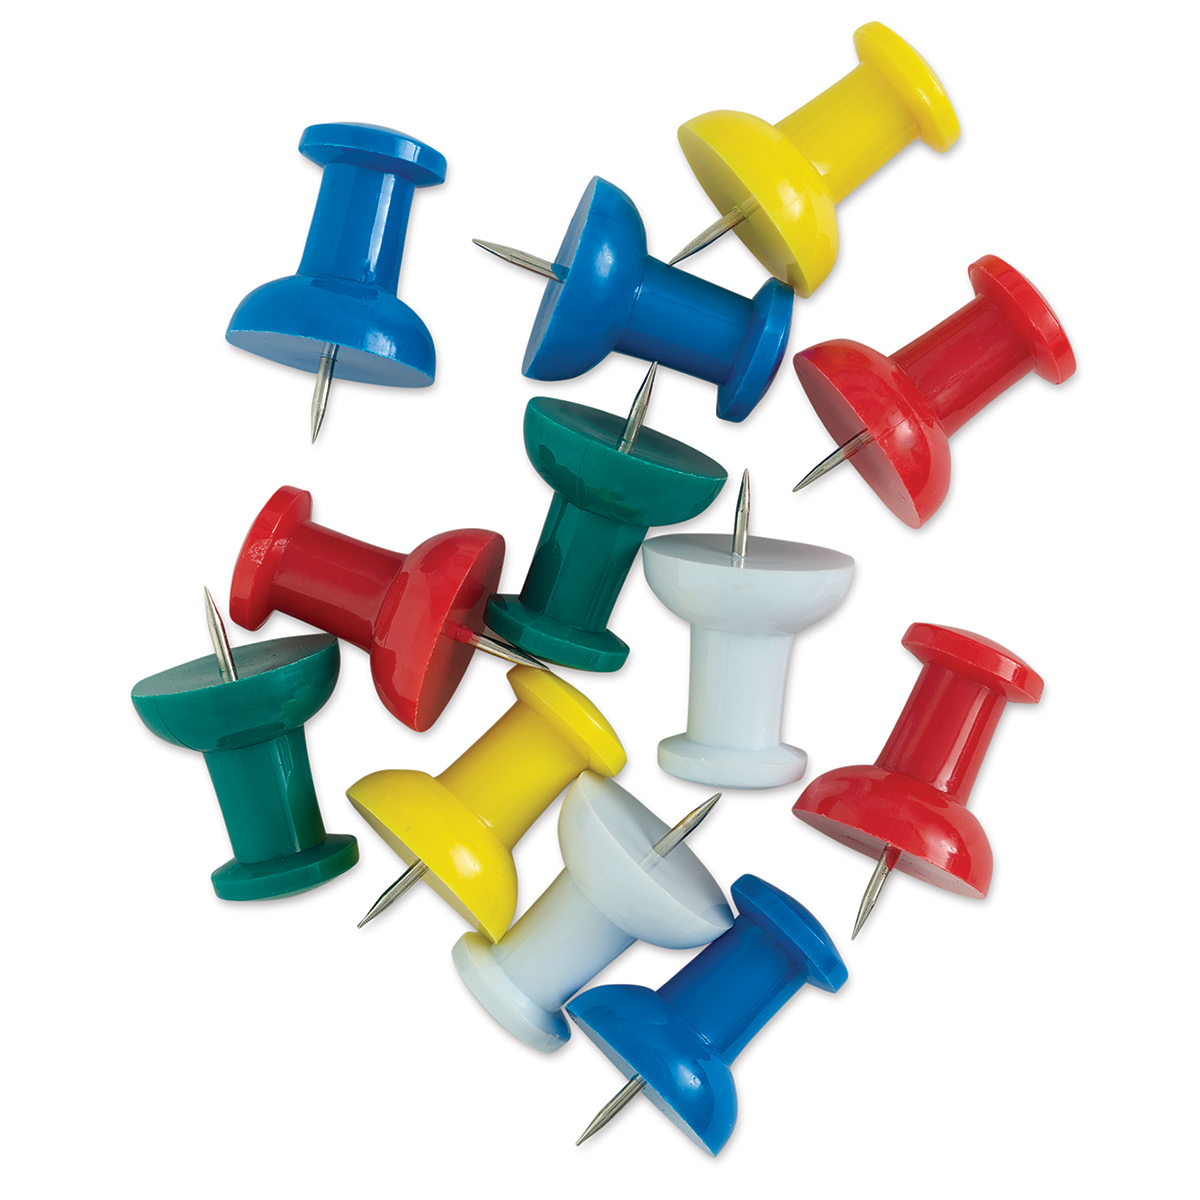 Officemate Giant Push Pins 1.5 Inch Assorted Colors Tub of 12 92902 